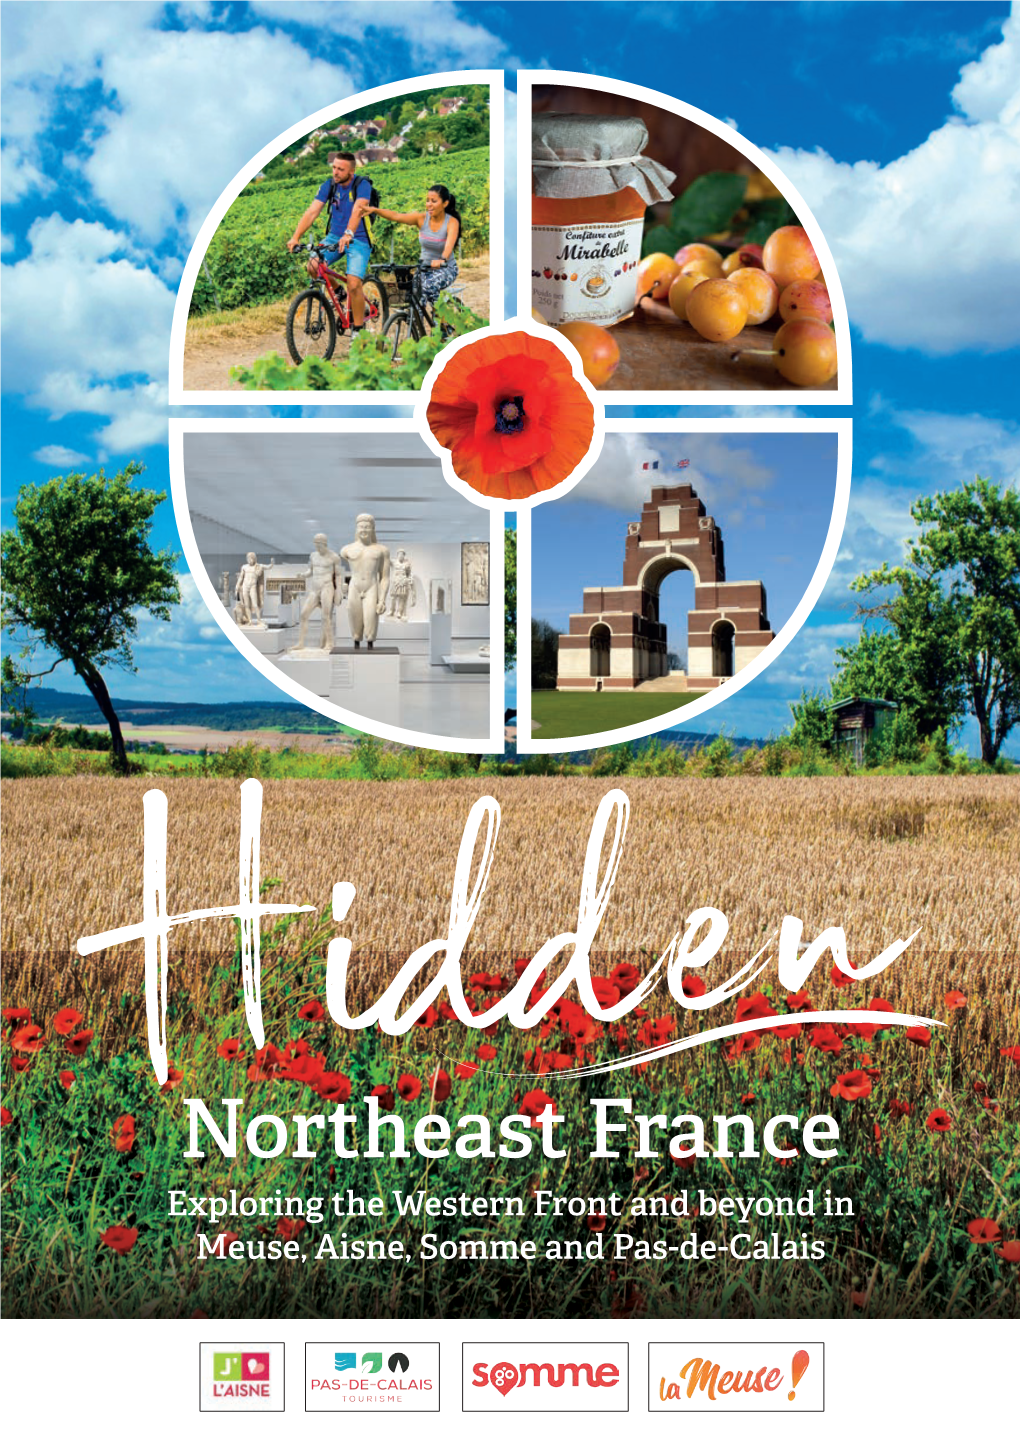 Northeast France Hiddenexploring the Western Front and Beyond in Meuse, Aisne, Somme and Pas-De-Calais INTRODUCTION INTRODUCTION